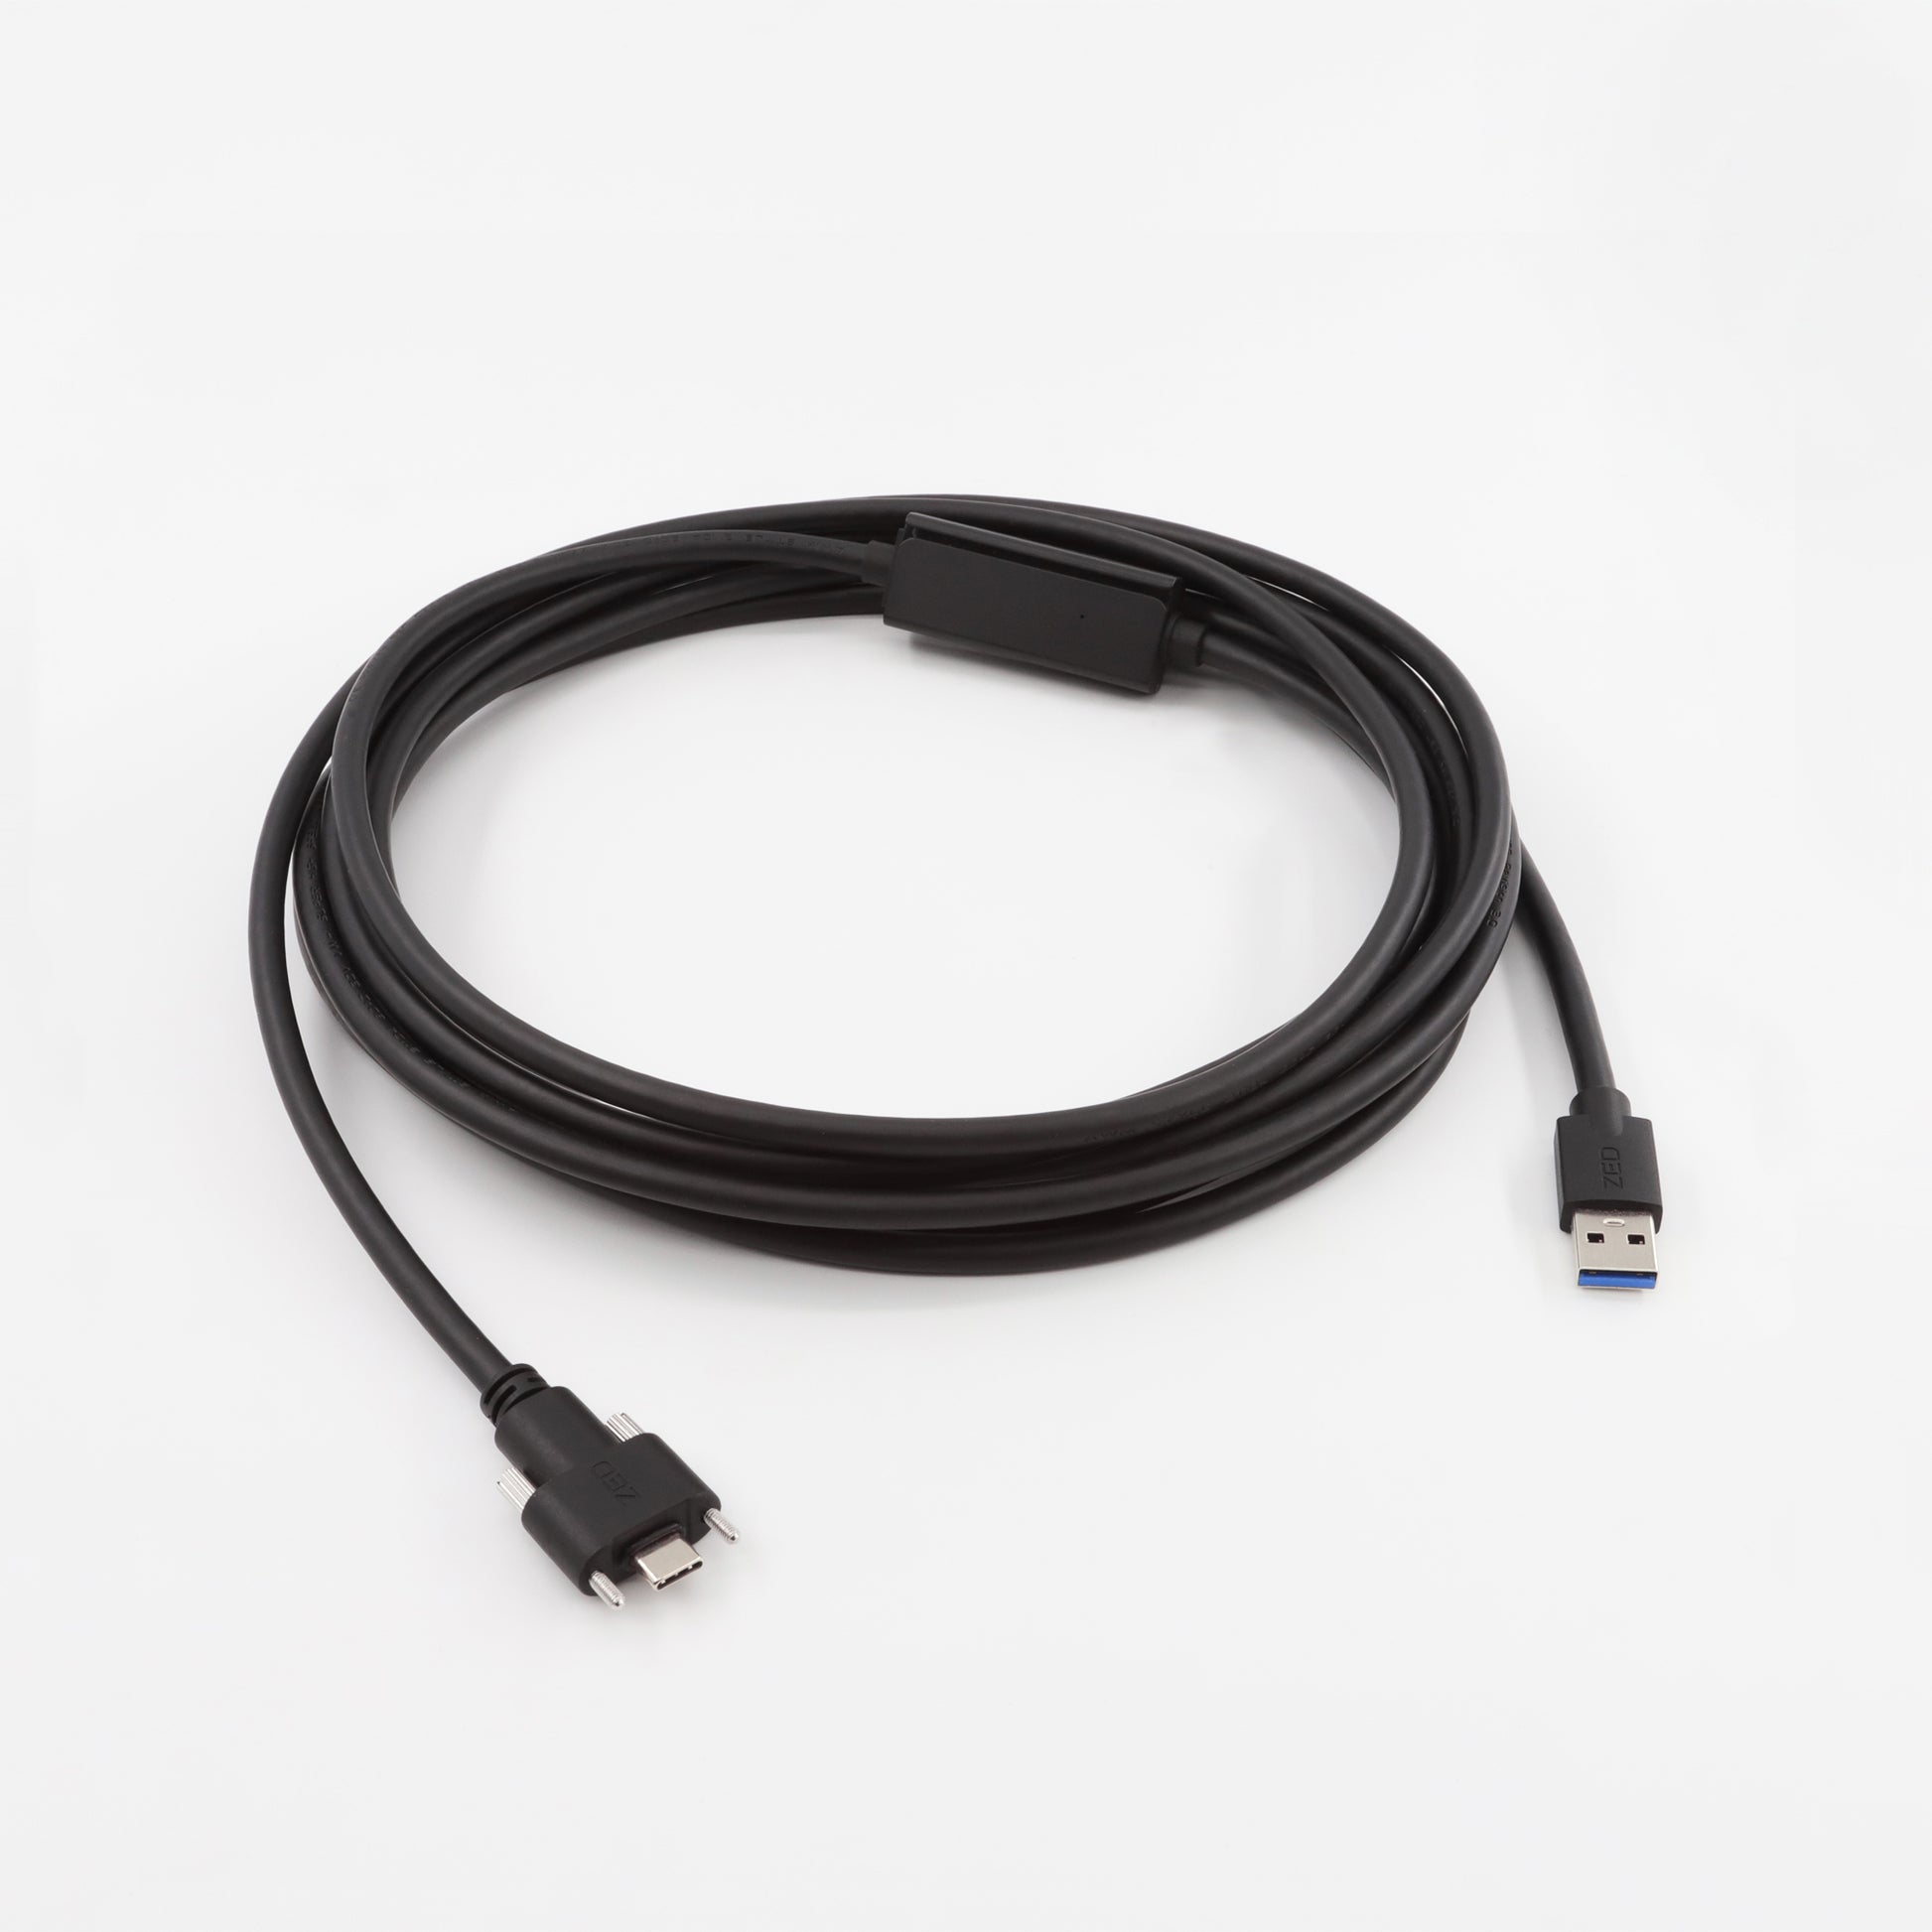 NTC  USB 2.0 A to B with Screw (M3) Locking Cable with Ferrite Cores